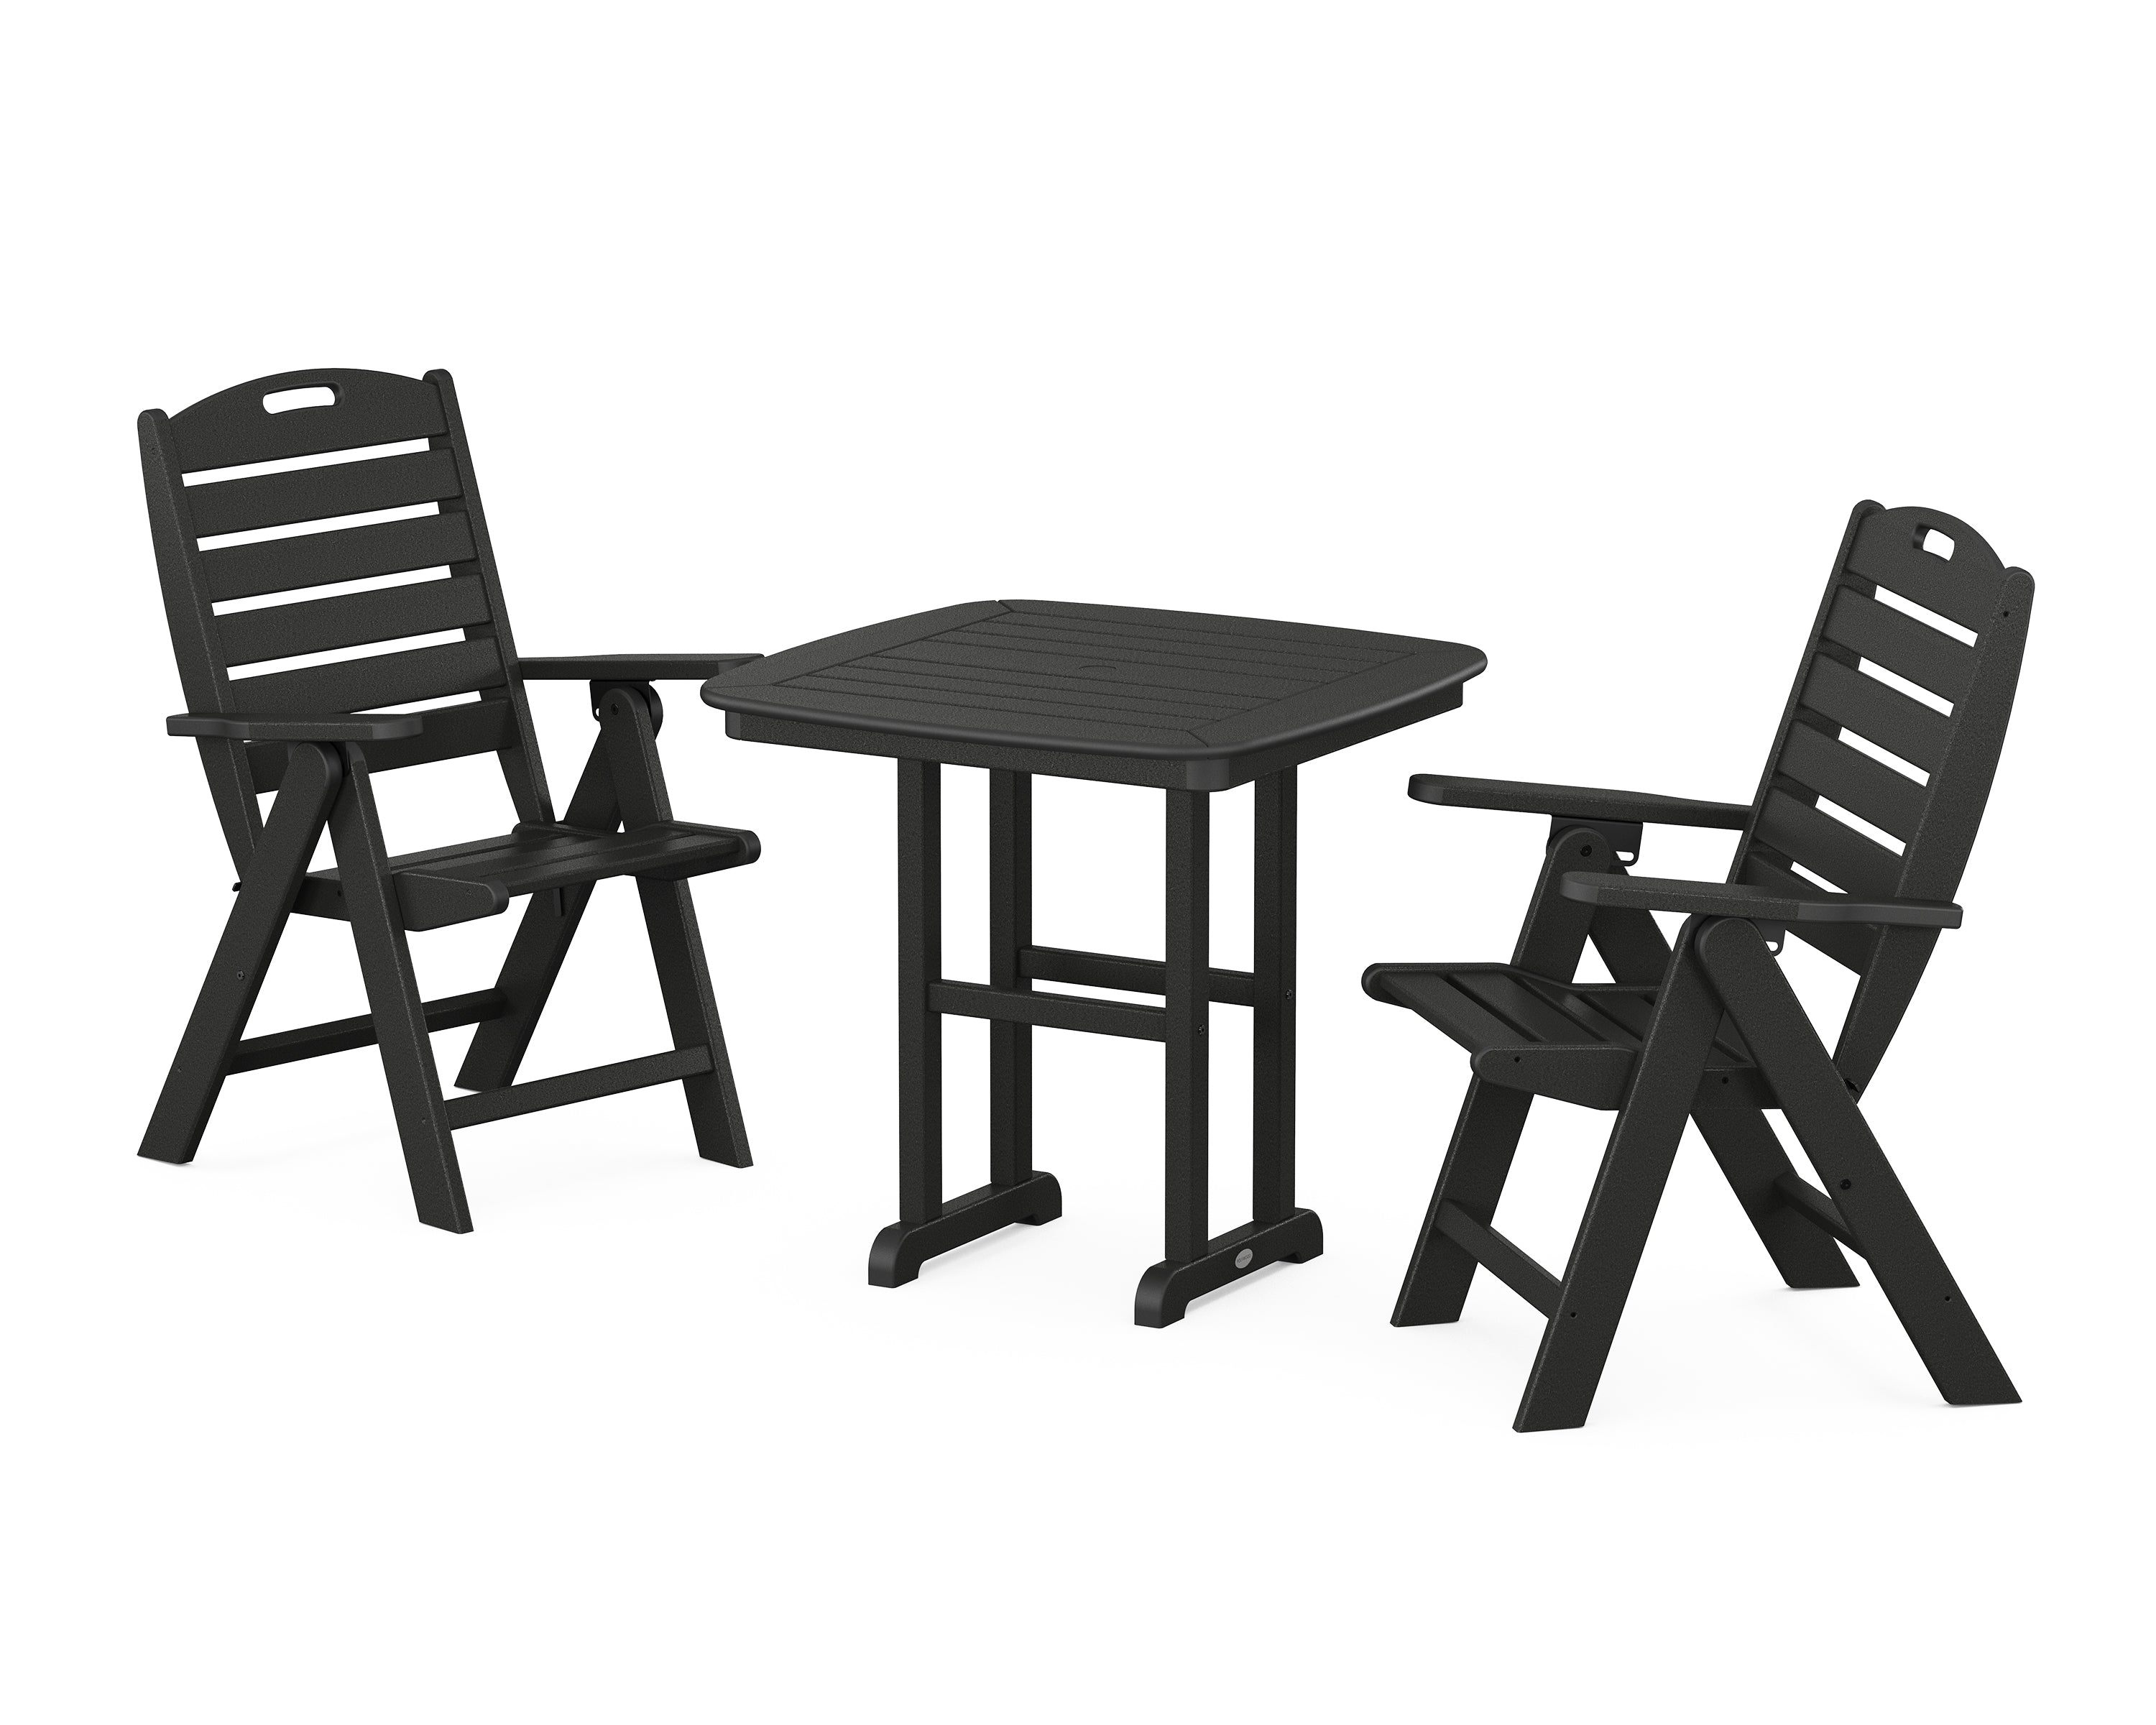 POLYWOOD® Nautical Folding Highback Chair 3-Piece Dining Set in Black